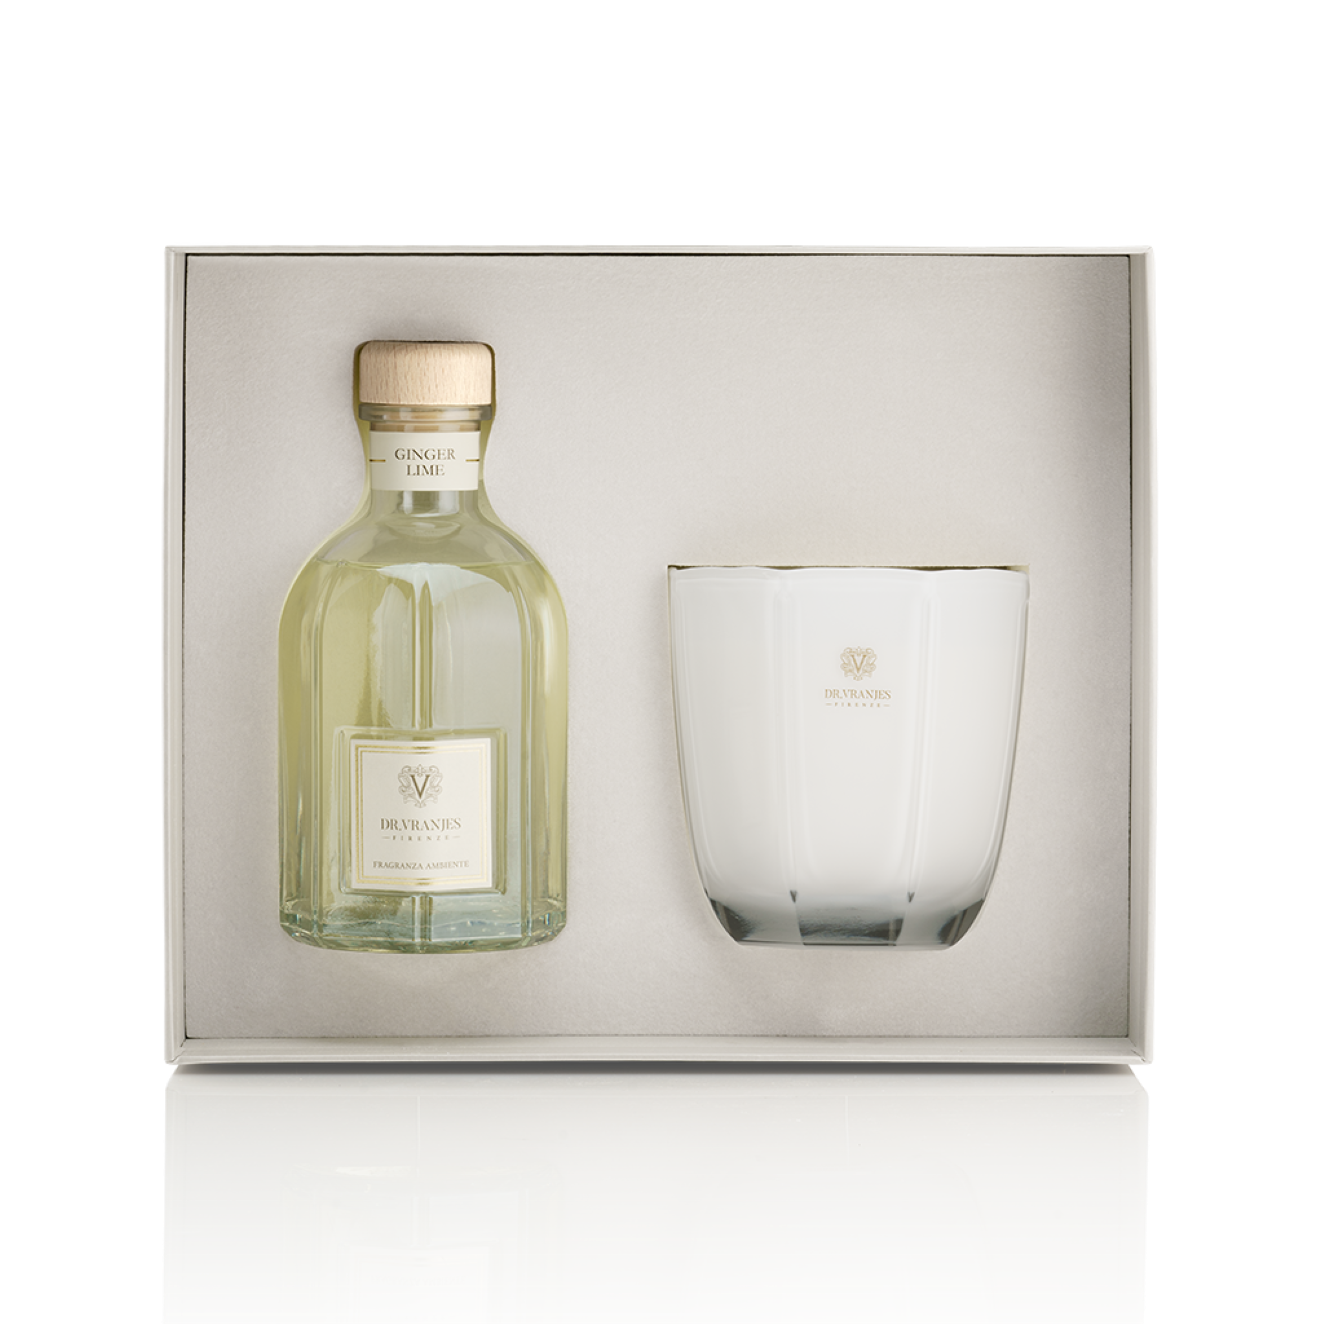 Gift Set - Ginger Lime - 500ml diffuser 500gr candle